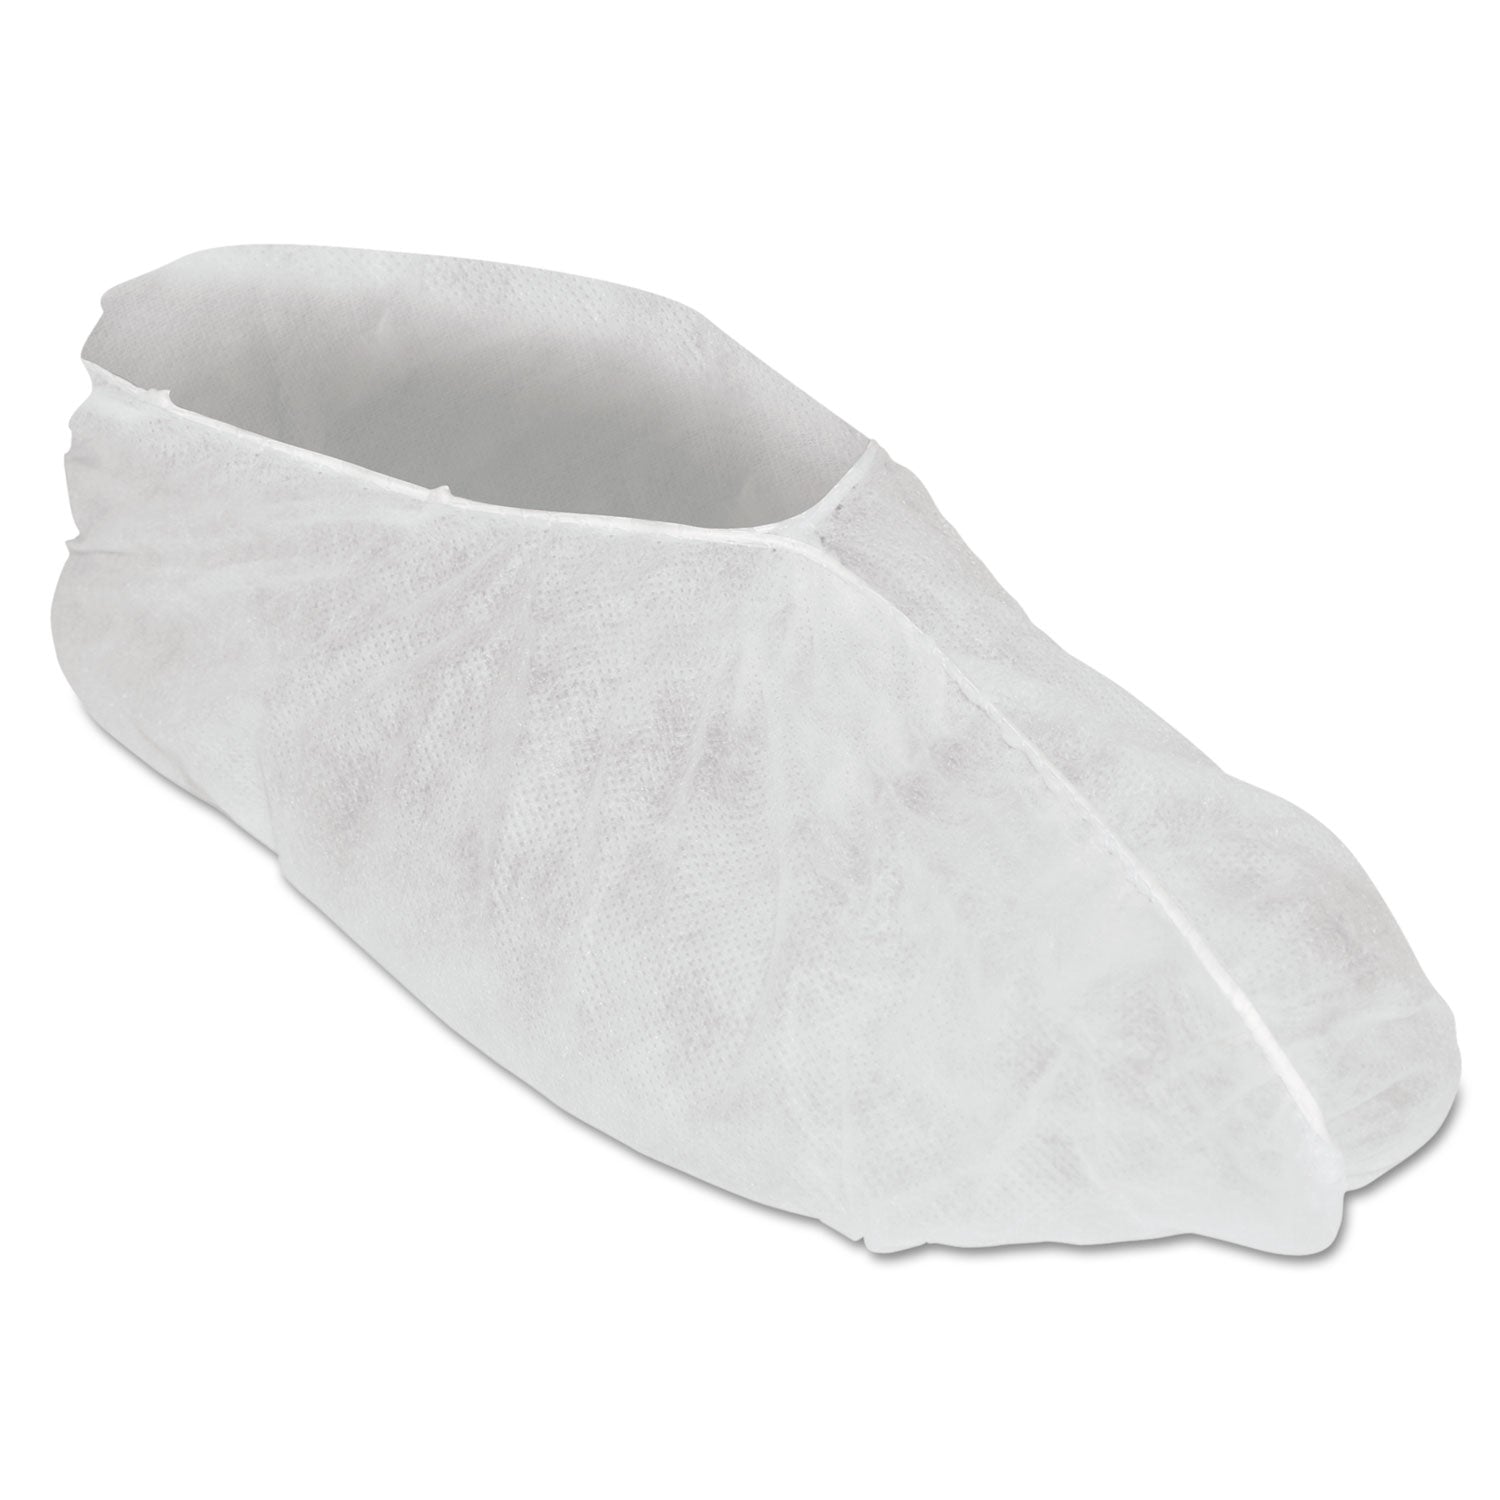 a20-breathable-particle-protection-shoe-covers-one-size-fits-all-white-300-carton_kcc36885 - 1